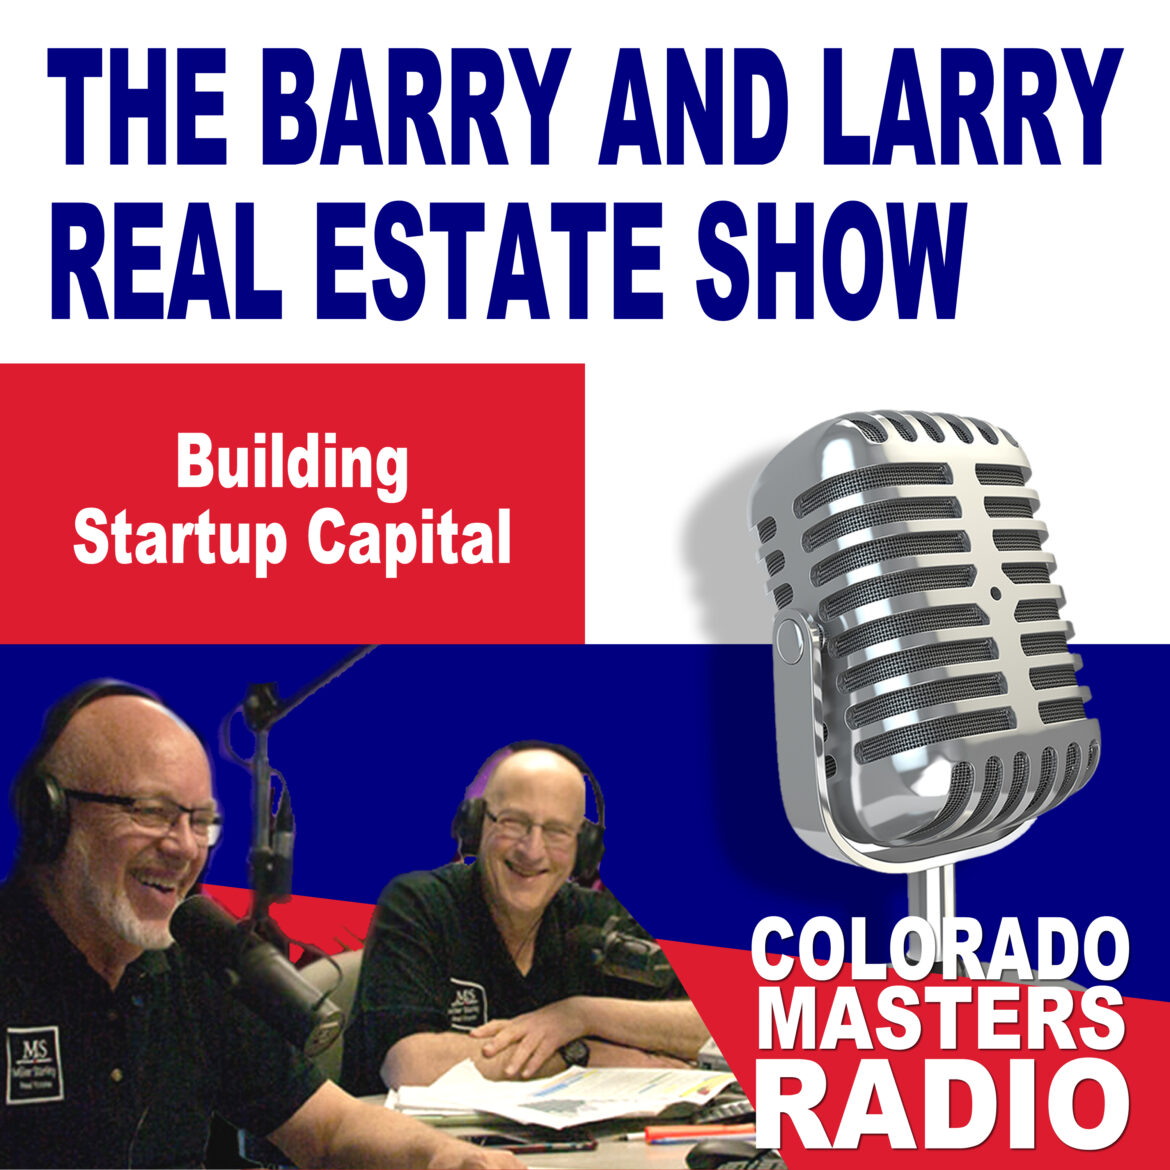 The Larry and Barry Real Estate Show - Building Startup Capital